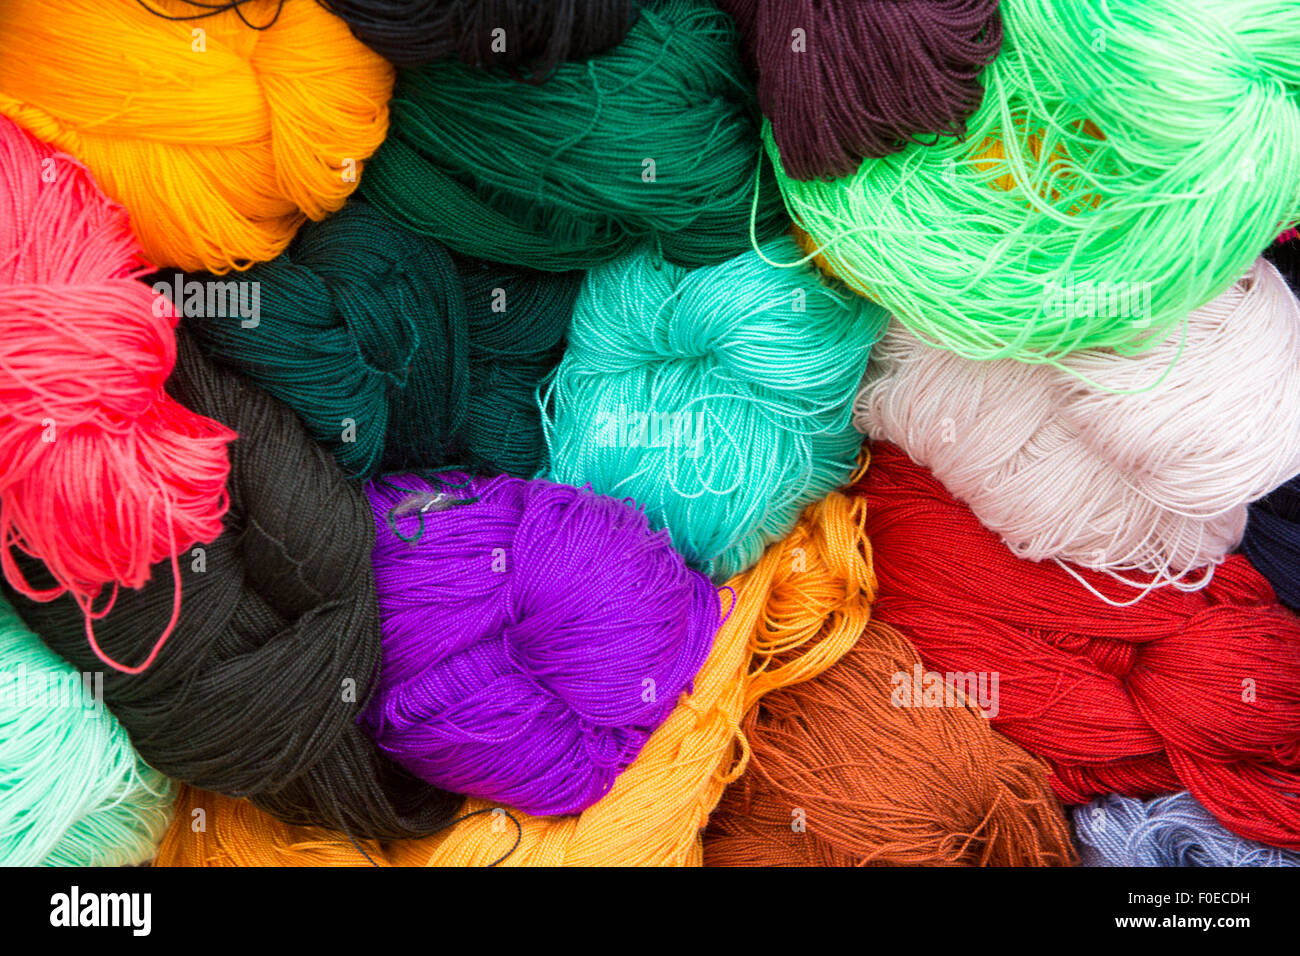 Top view of colorful balls of wool at the Andean craft market of Otavalo, Ecuador 2015 Stock Photo